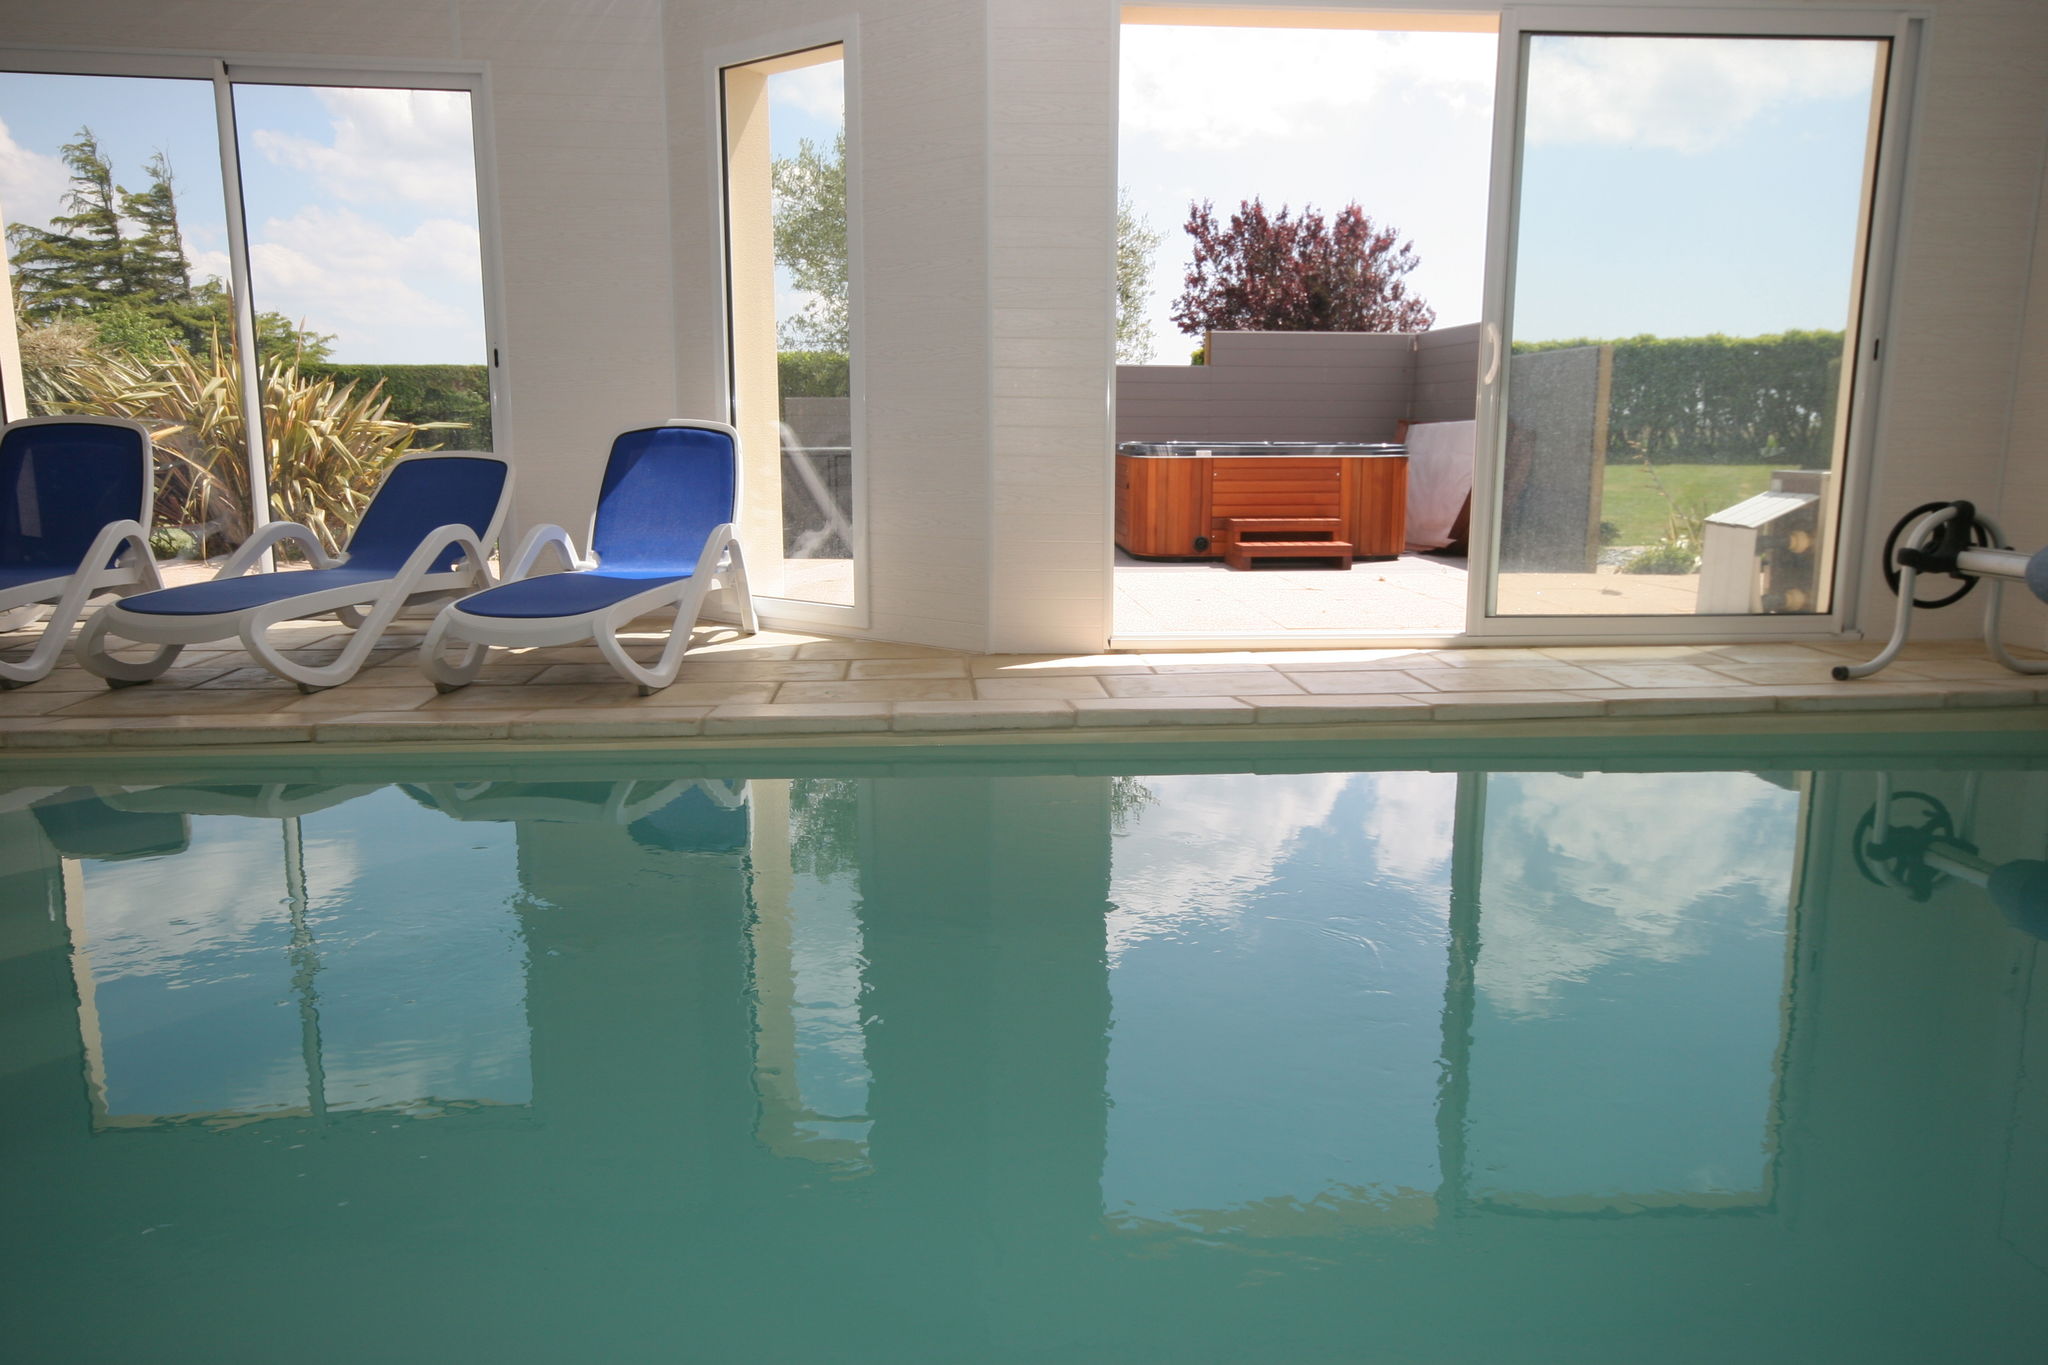 Villa with indoor heated pool and jacuzzi, only 1.5 km of beach and sea